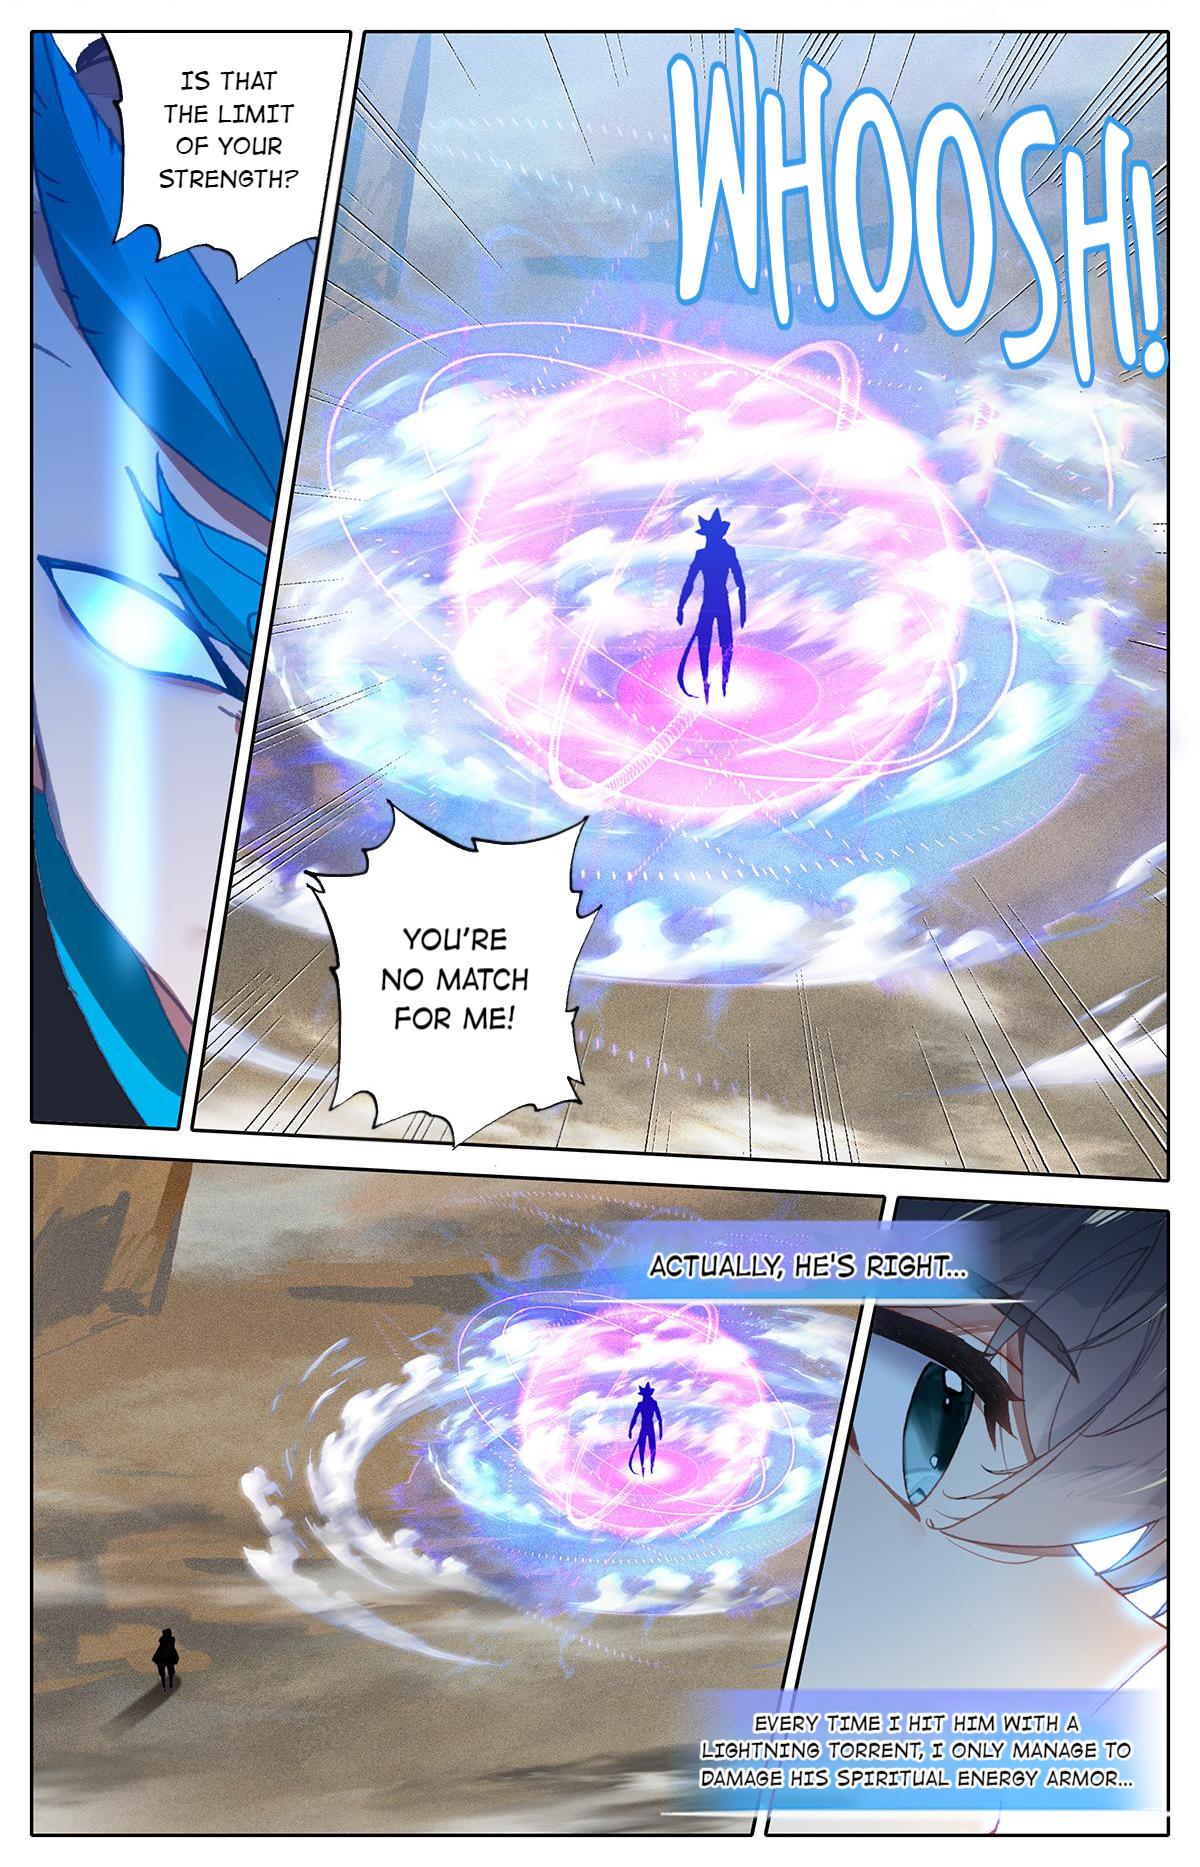 The Strongest Commoner In The Academy Of Immortal Cultivators - Page 2